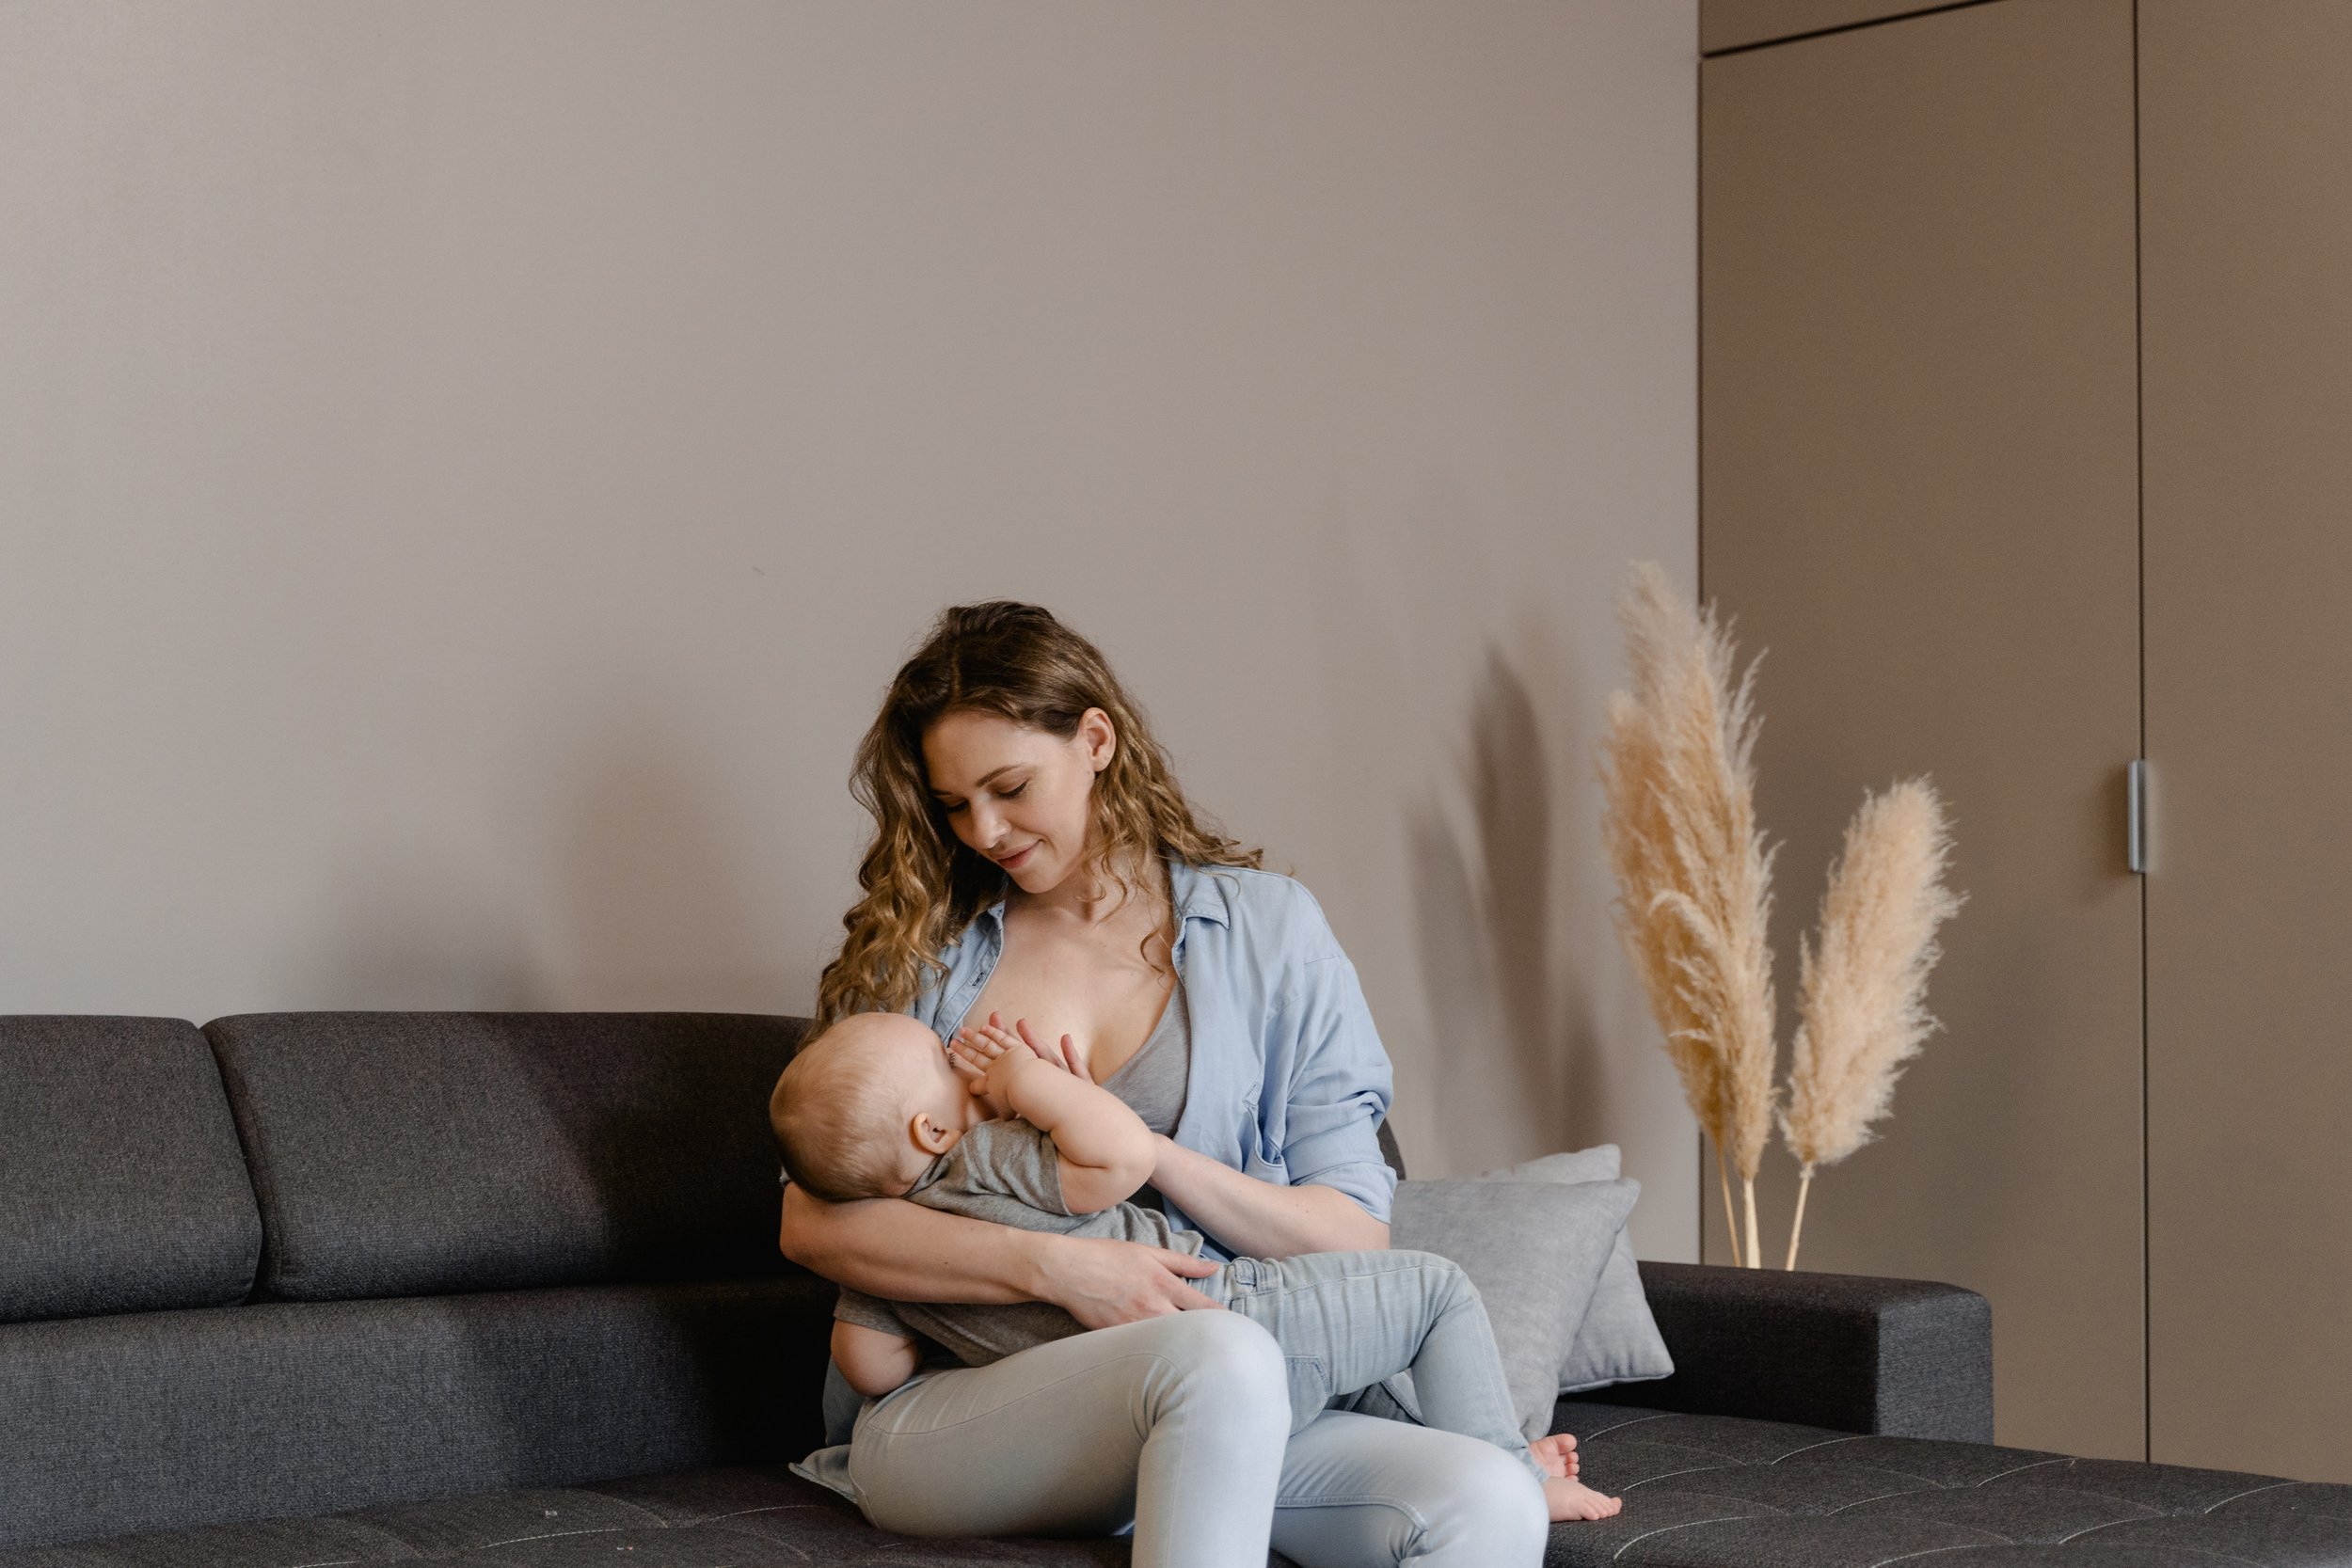 Breastfeeding Essentials  what you ACTUALLY need 